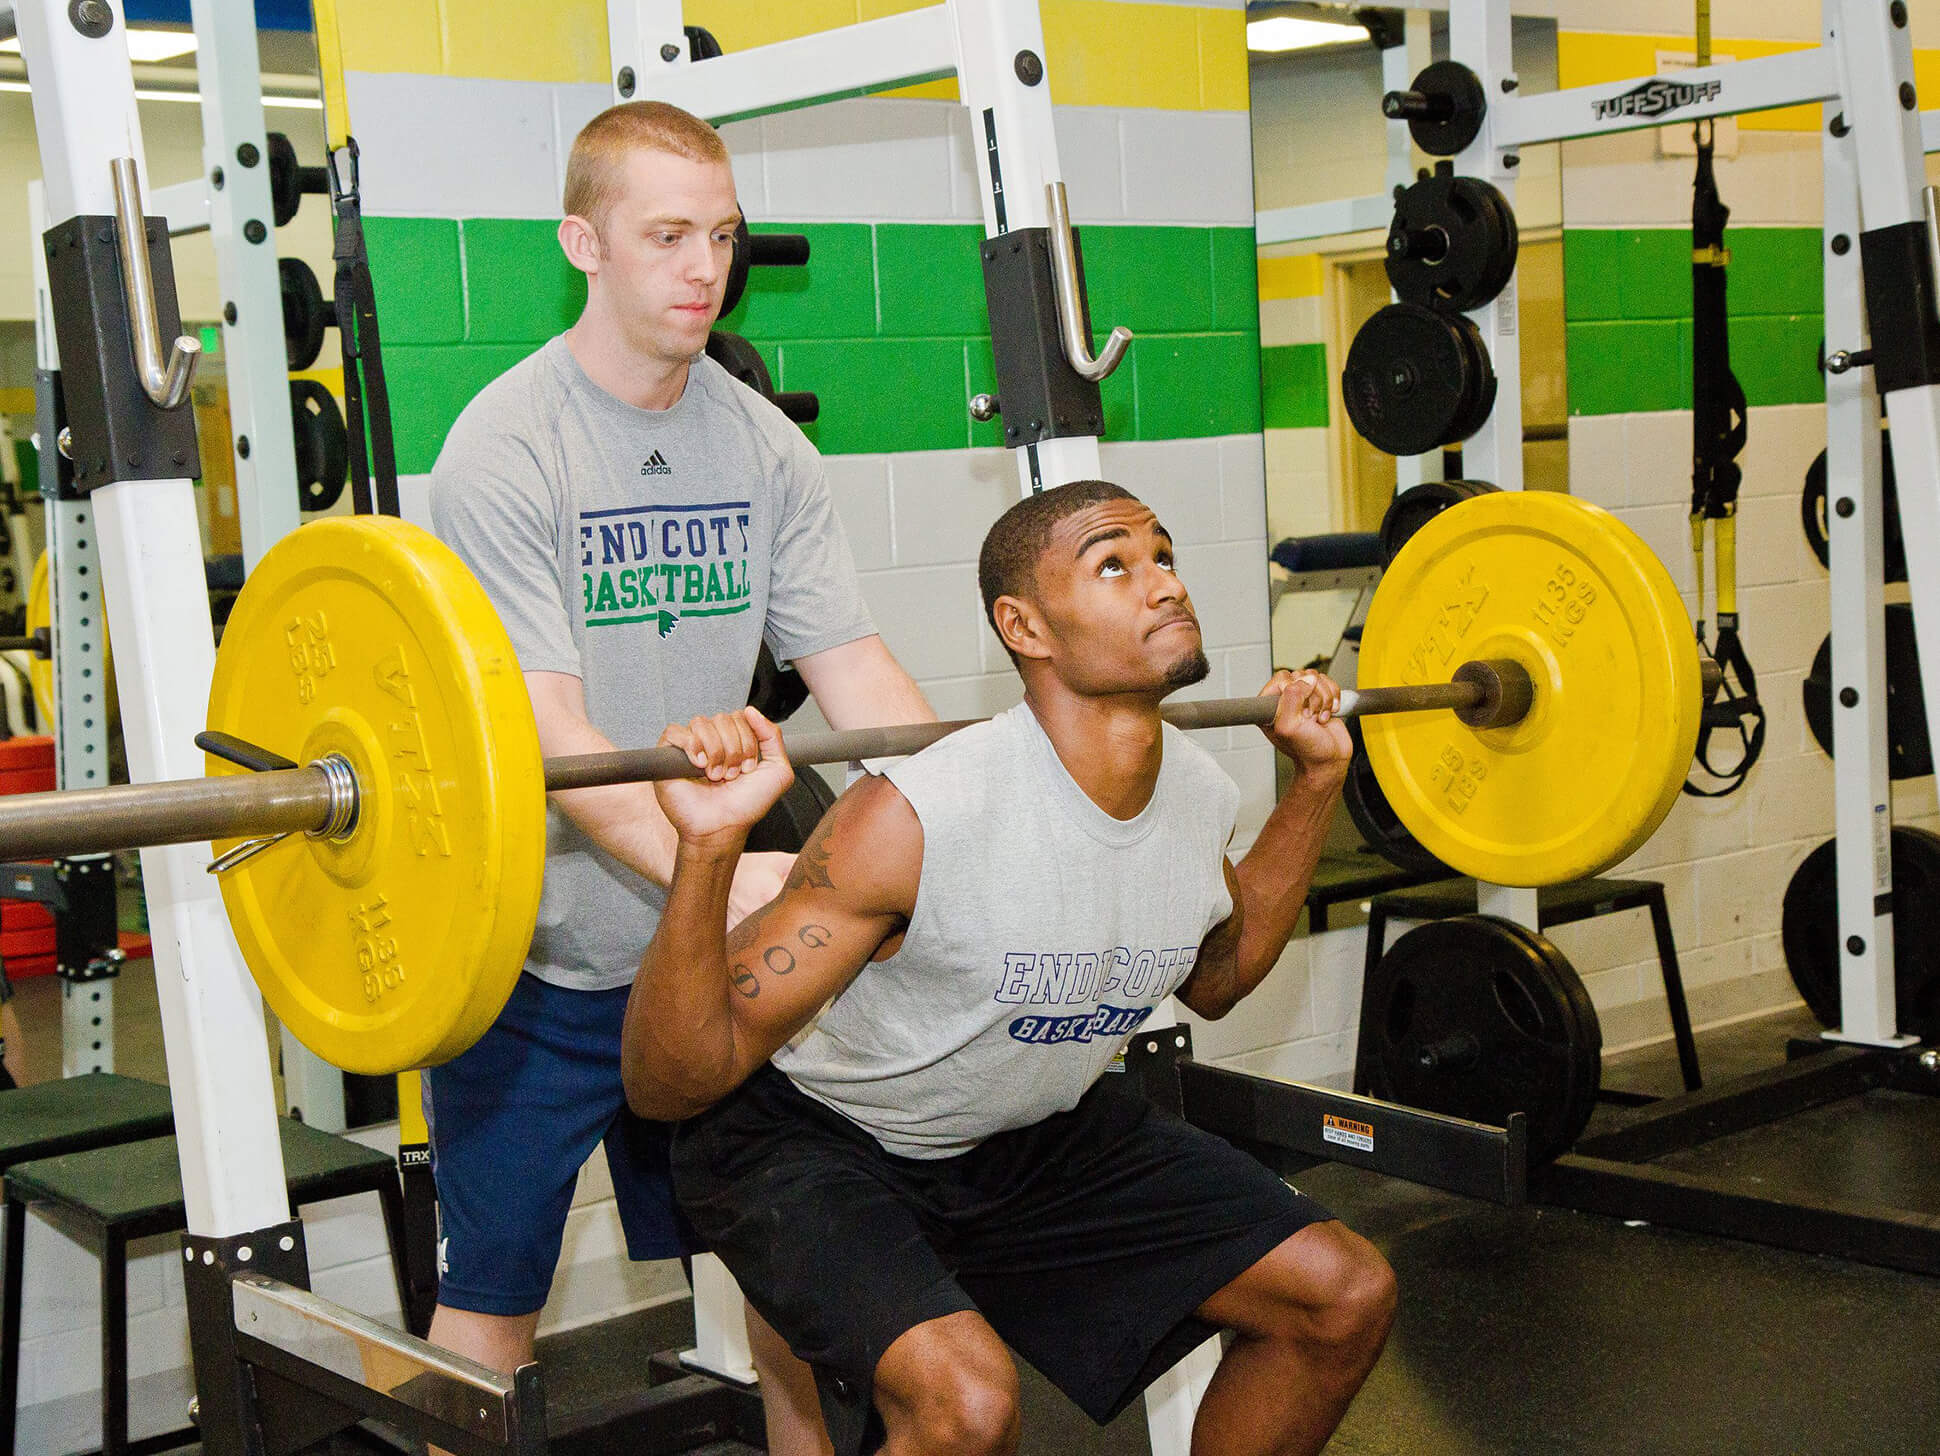 student lifting weights in fitness center with friend spotting his lifting